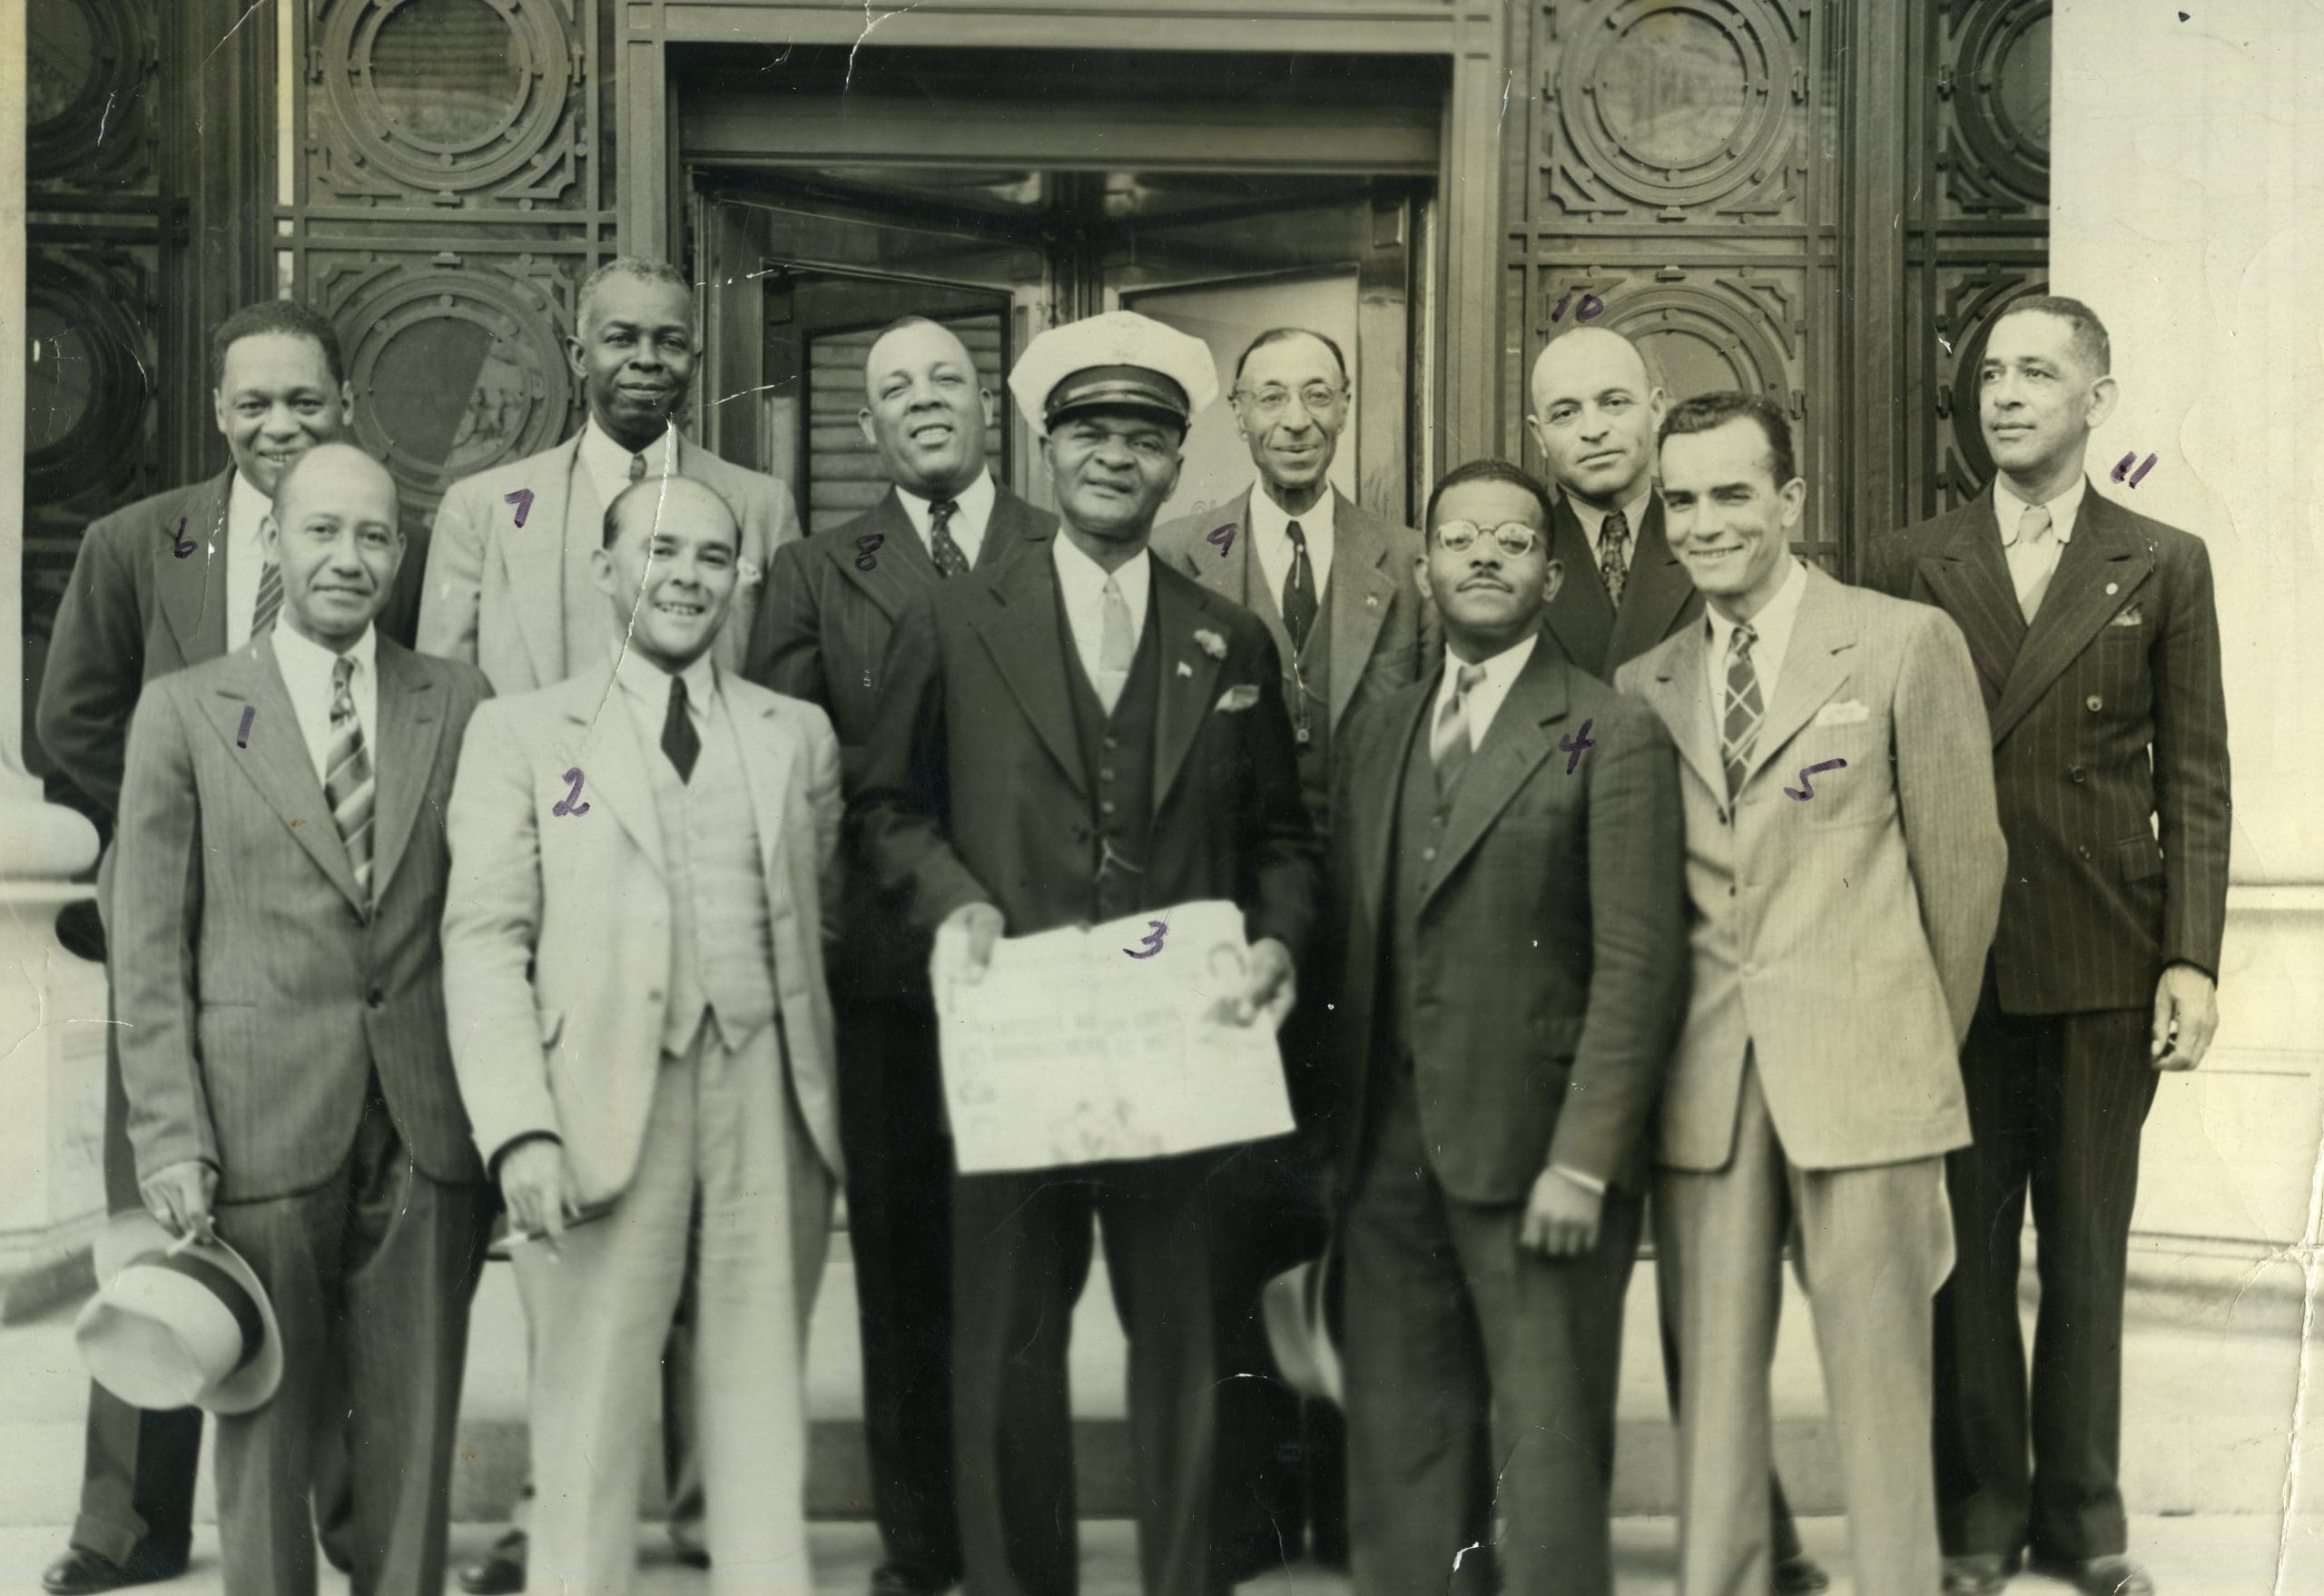 John A. Wilds , first Black Oakland City Hall employee and first Black to run for Oakland City Council, stands with group of men in front of Oakland City Hall holding newspaper